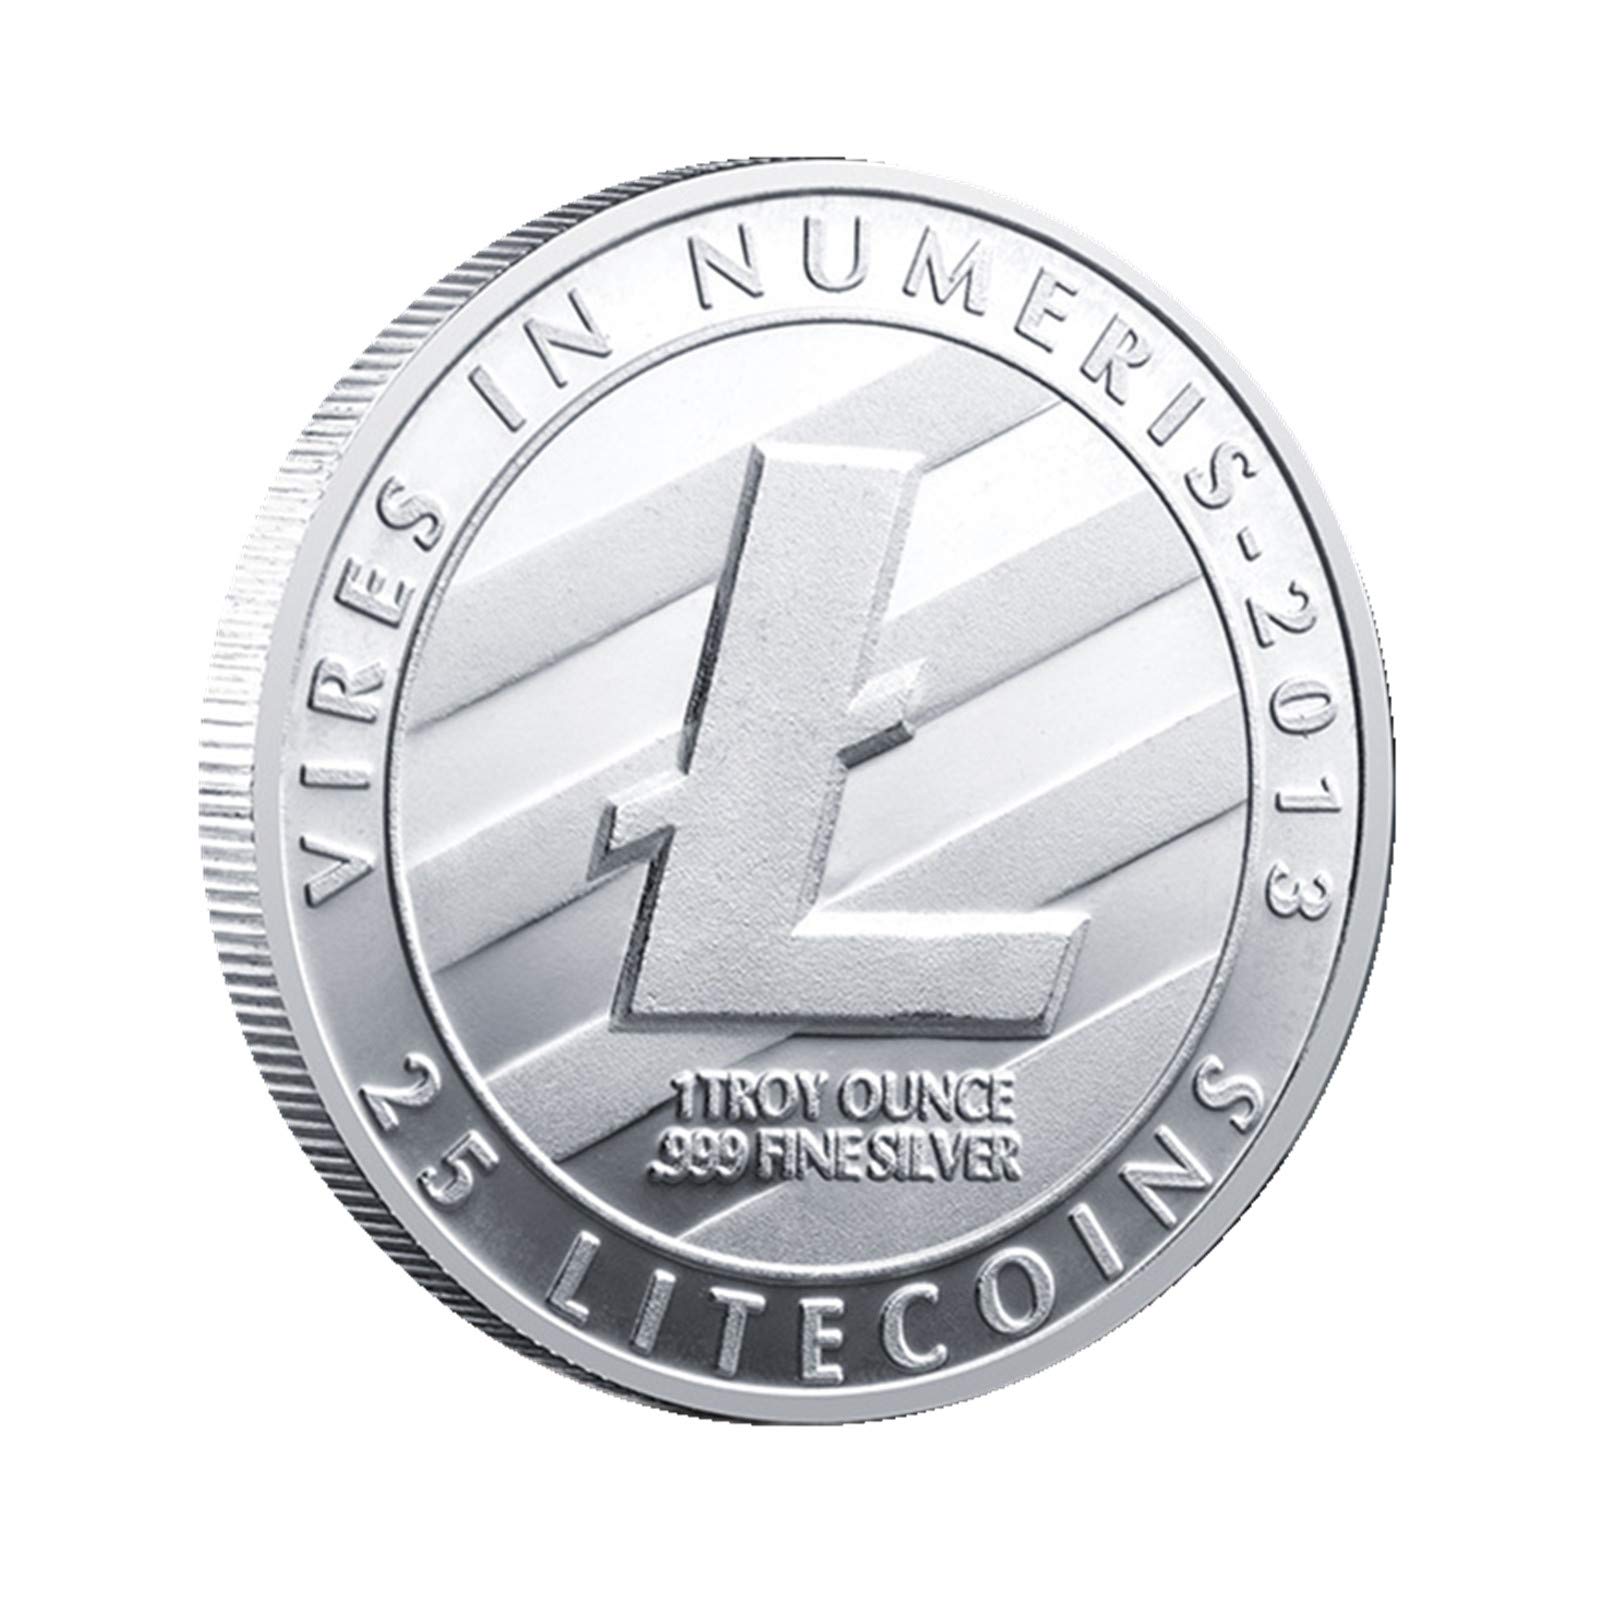 Litecoin Undergoes Third 'Halving,' in Milestone for Cryptocurrency Known as 'Digital Silver'